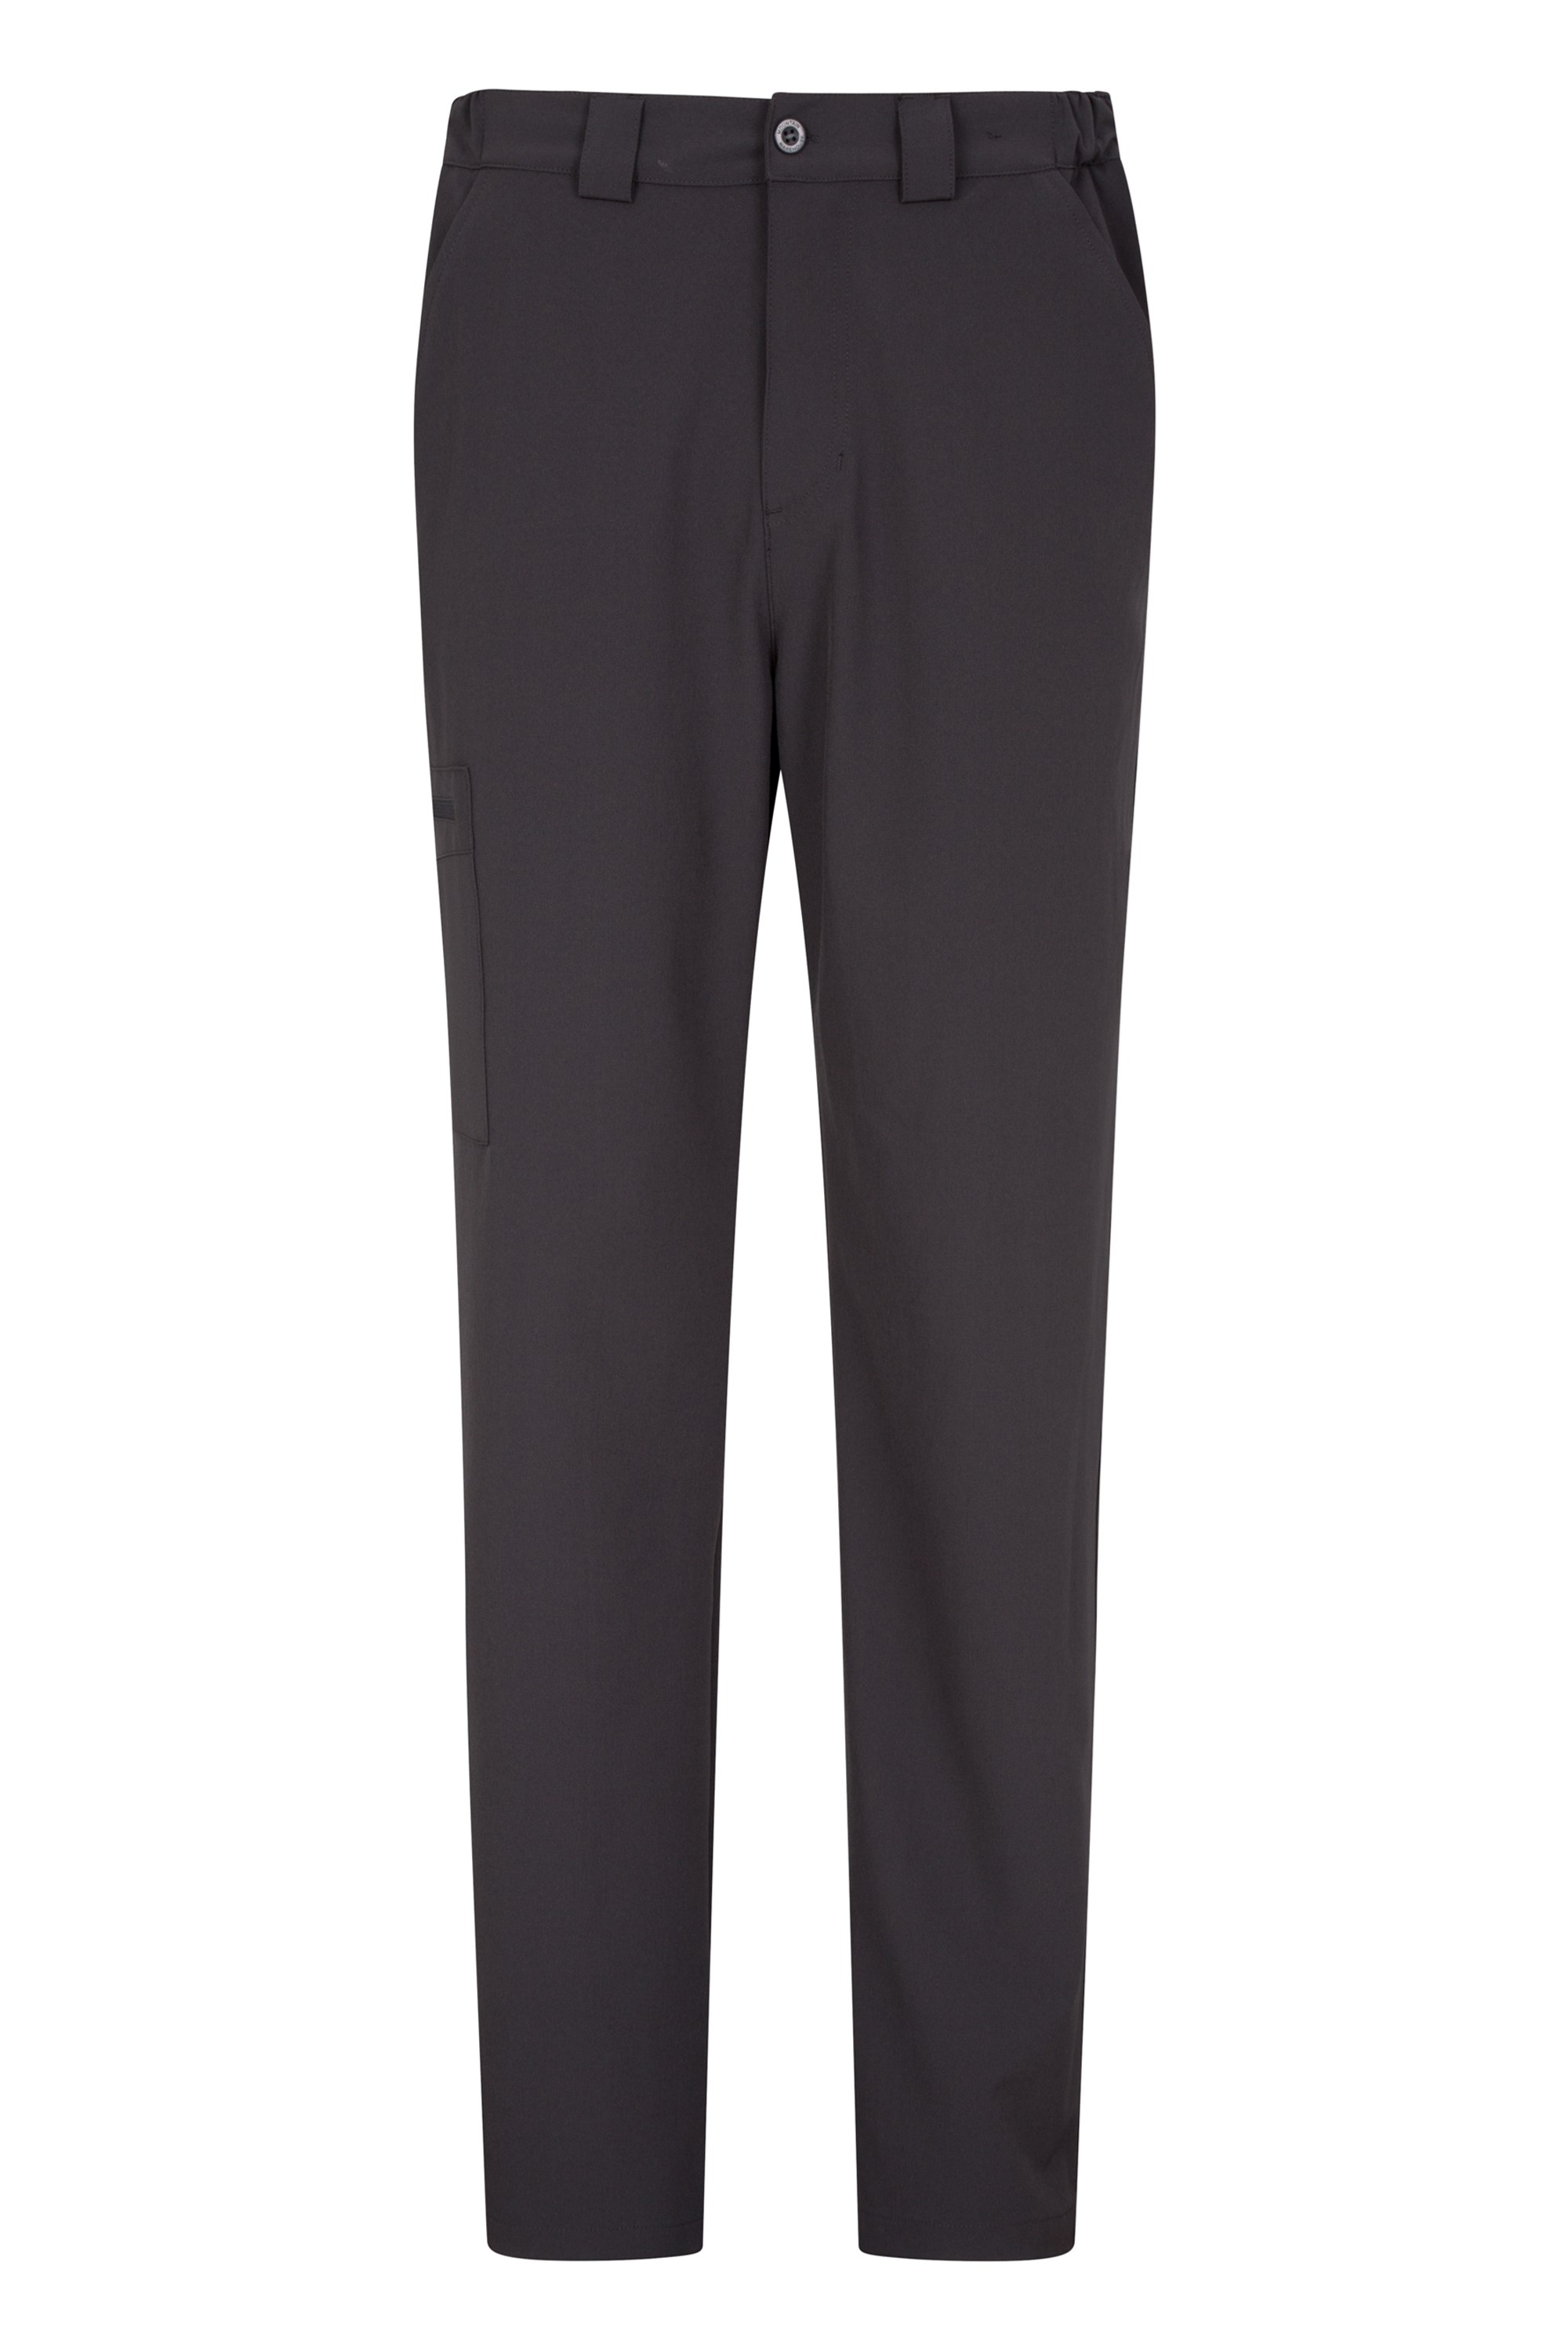 Stride Mens Stretch Pants - Extra Long | Mountain Warehouse CA